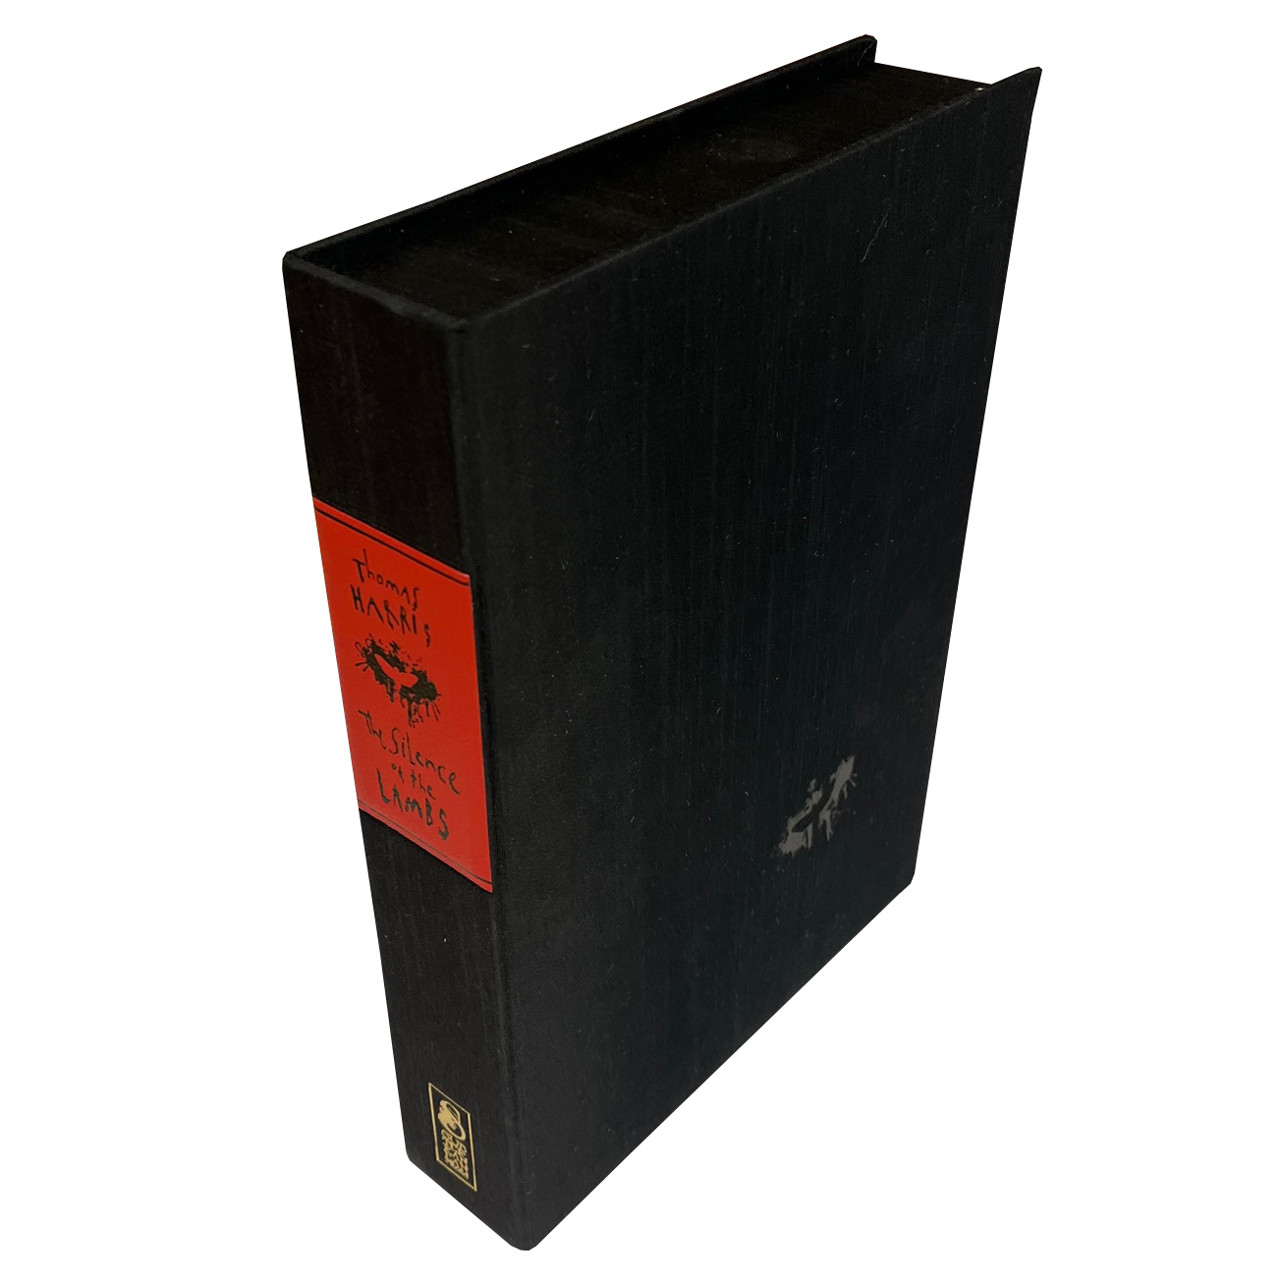 Thomas Harris "The Silence of the Lambs" Traycased Signed Lettered Edition "W" of 52, Leather-Bound [Very Fine]